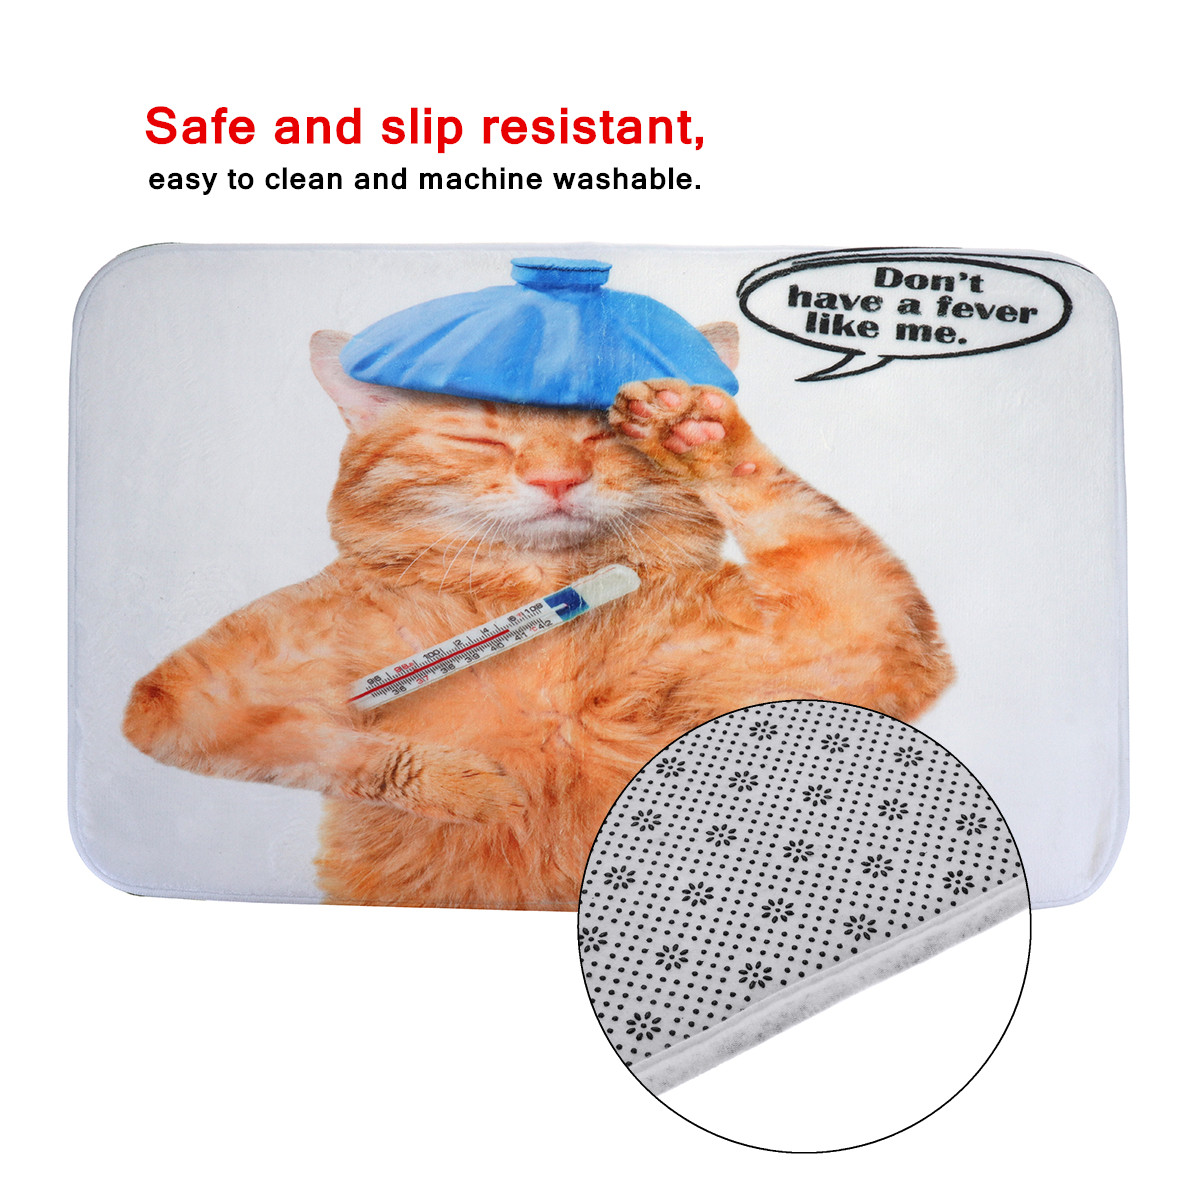 Toilet-Seat-Covers-Bathroom-Non-Slip-Thermometer-Fat-Cat-Pedestal-Rugs-Lid-Toilet-Covers-Bath-Mats-1411646-6